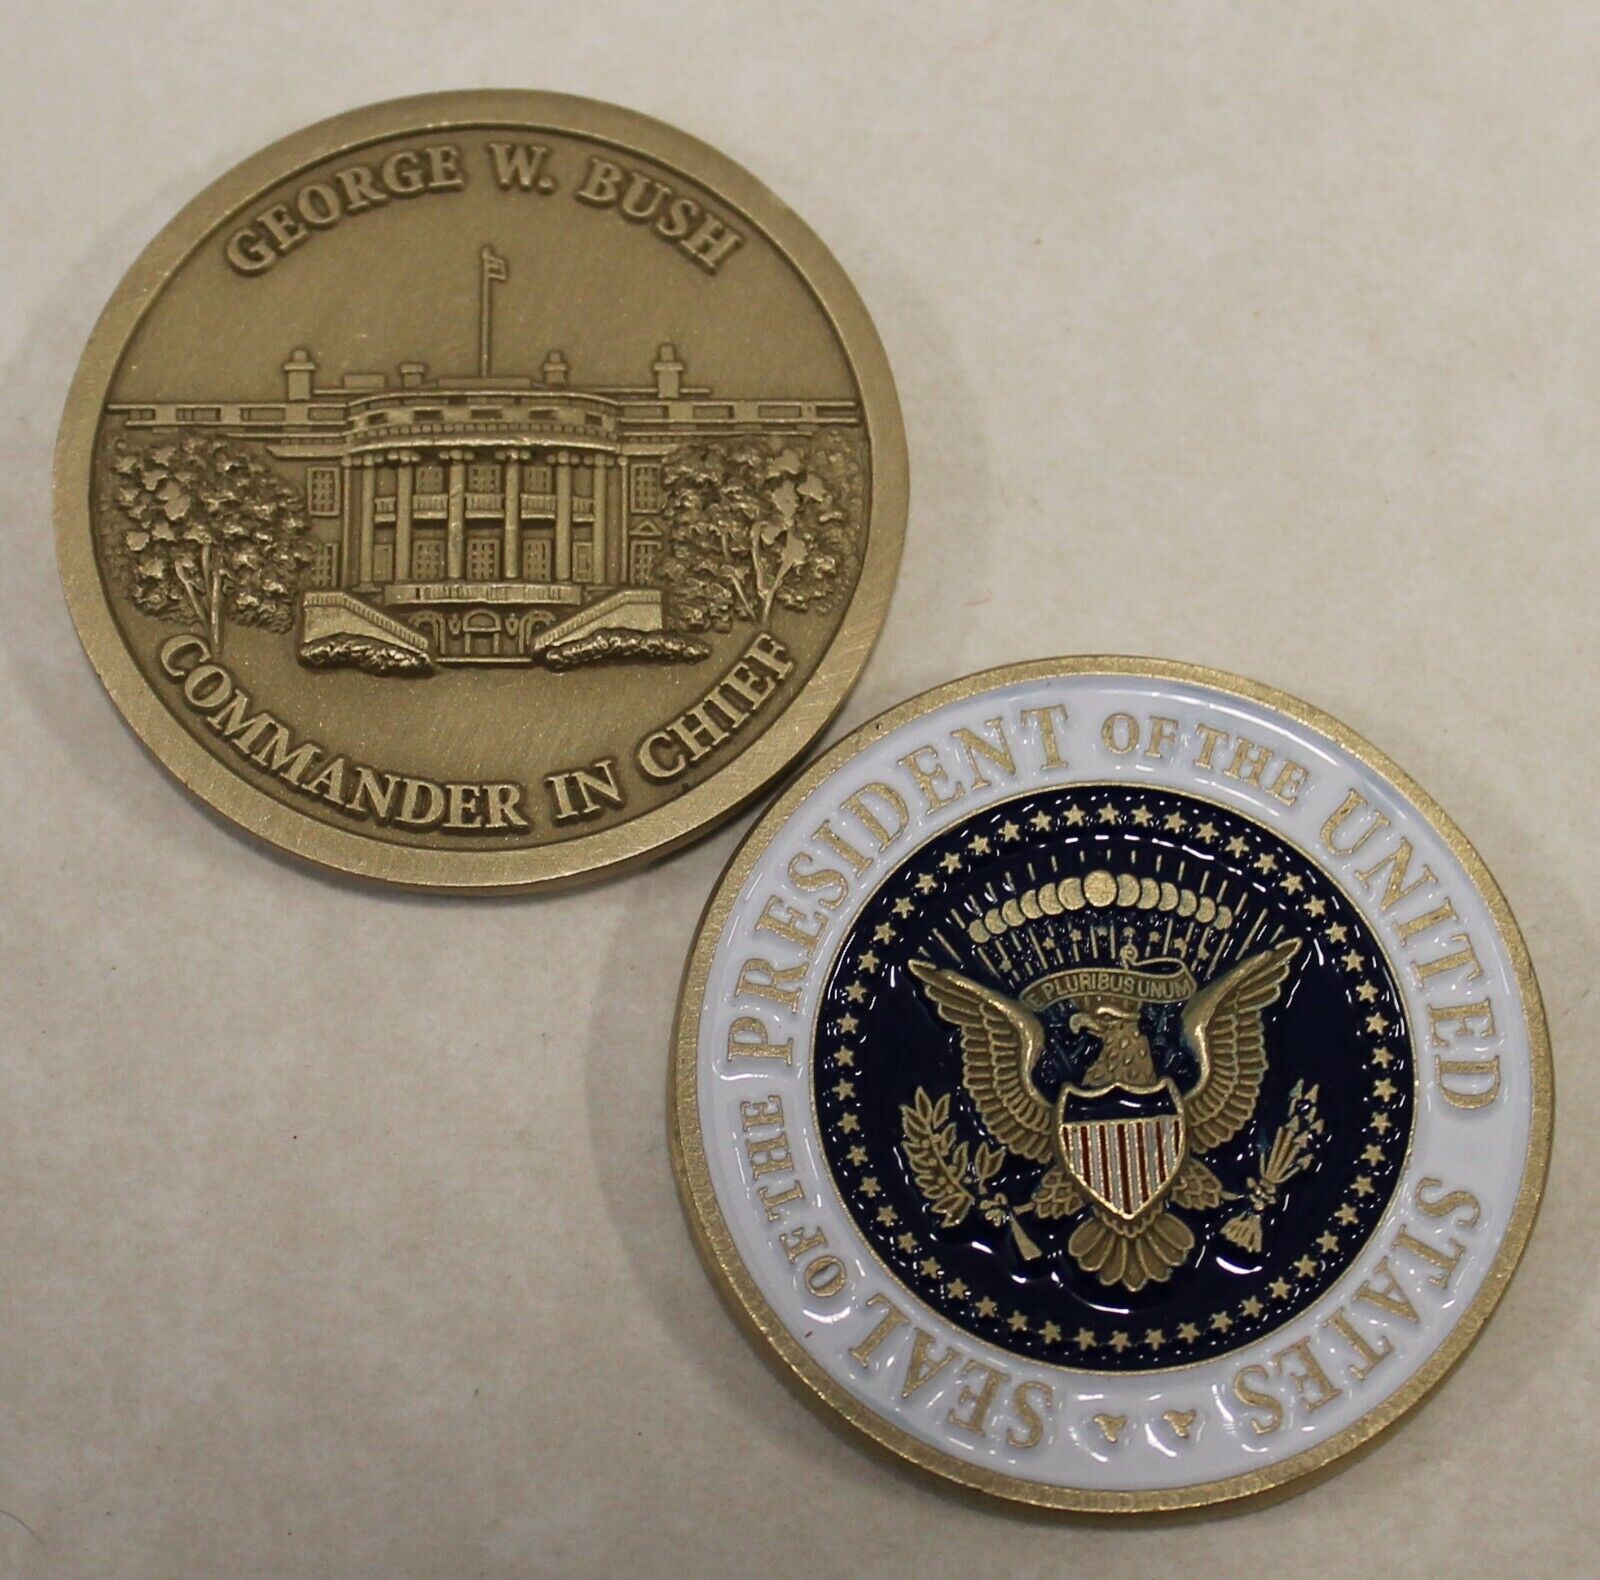 George W. Bush 43rd President of the Unites States Challenge Coin 